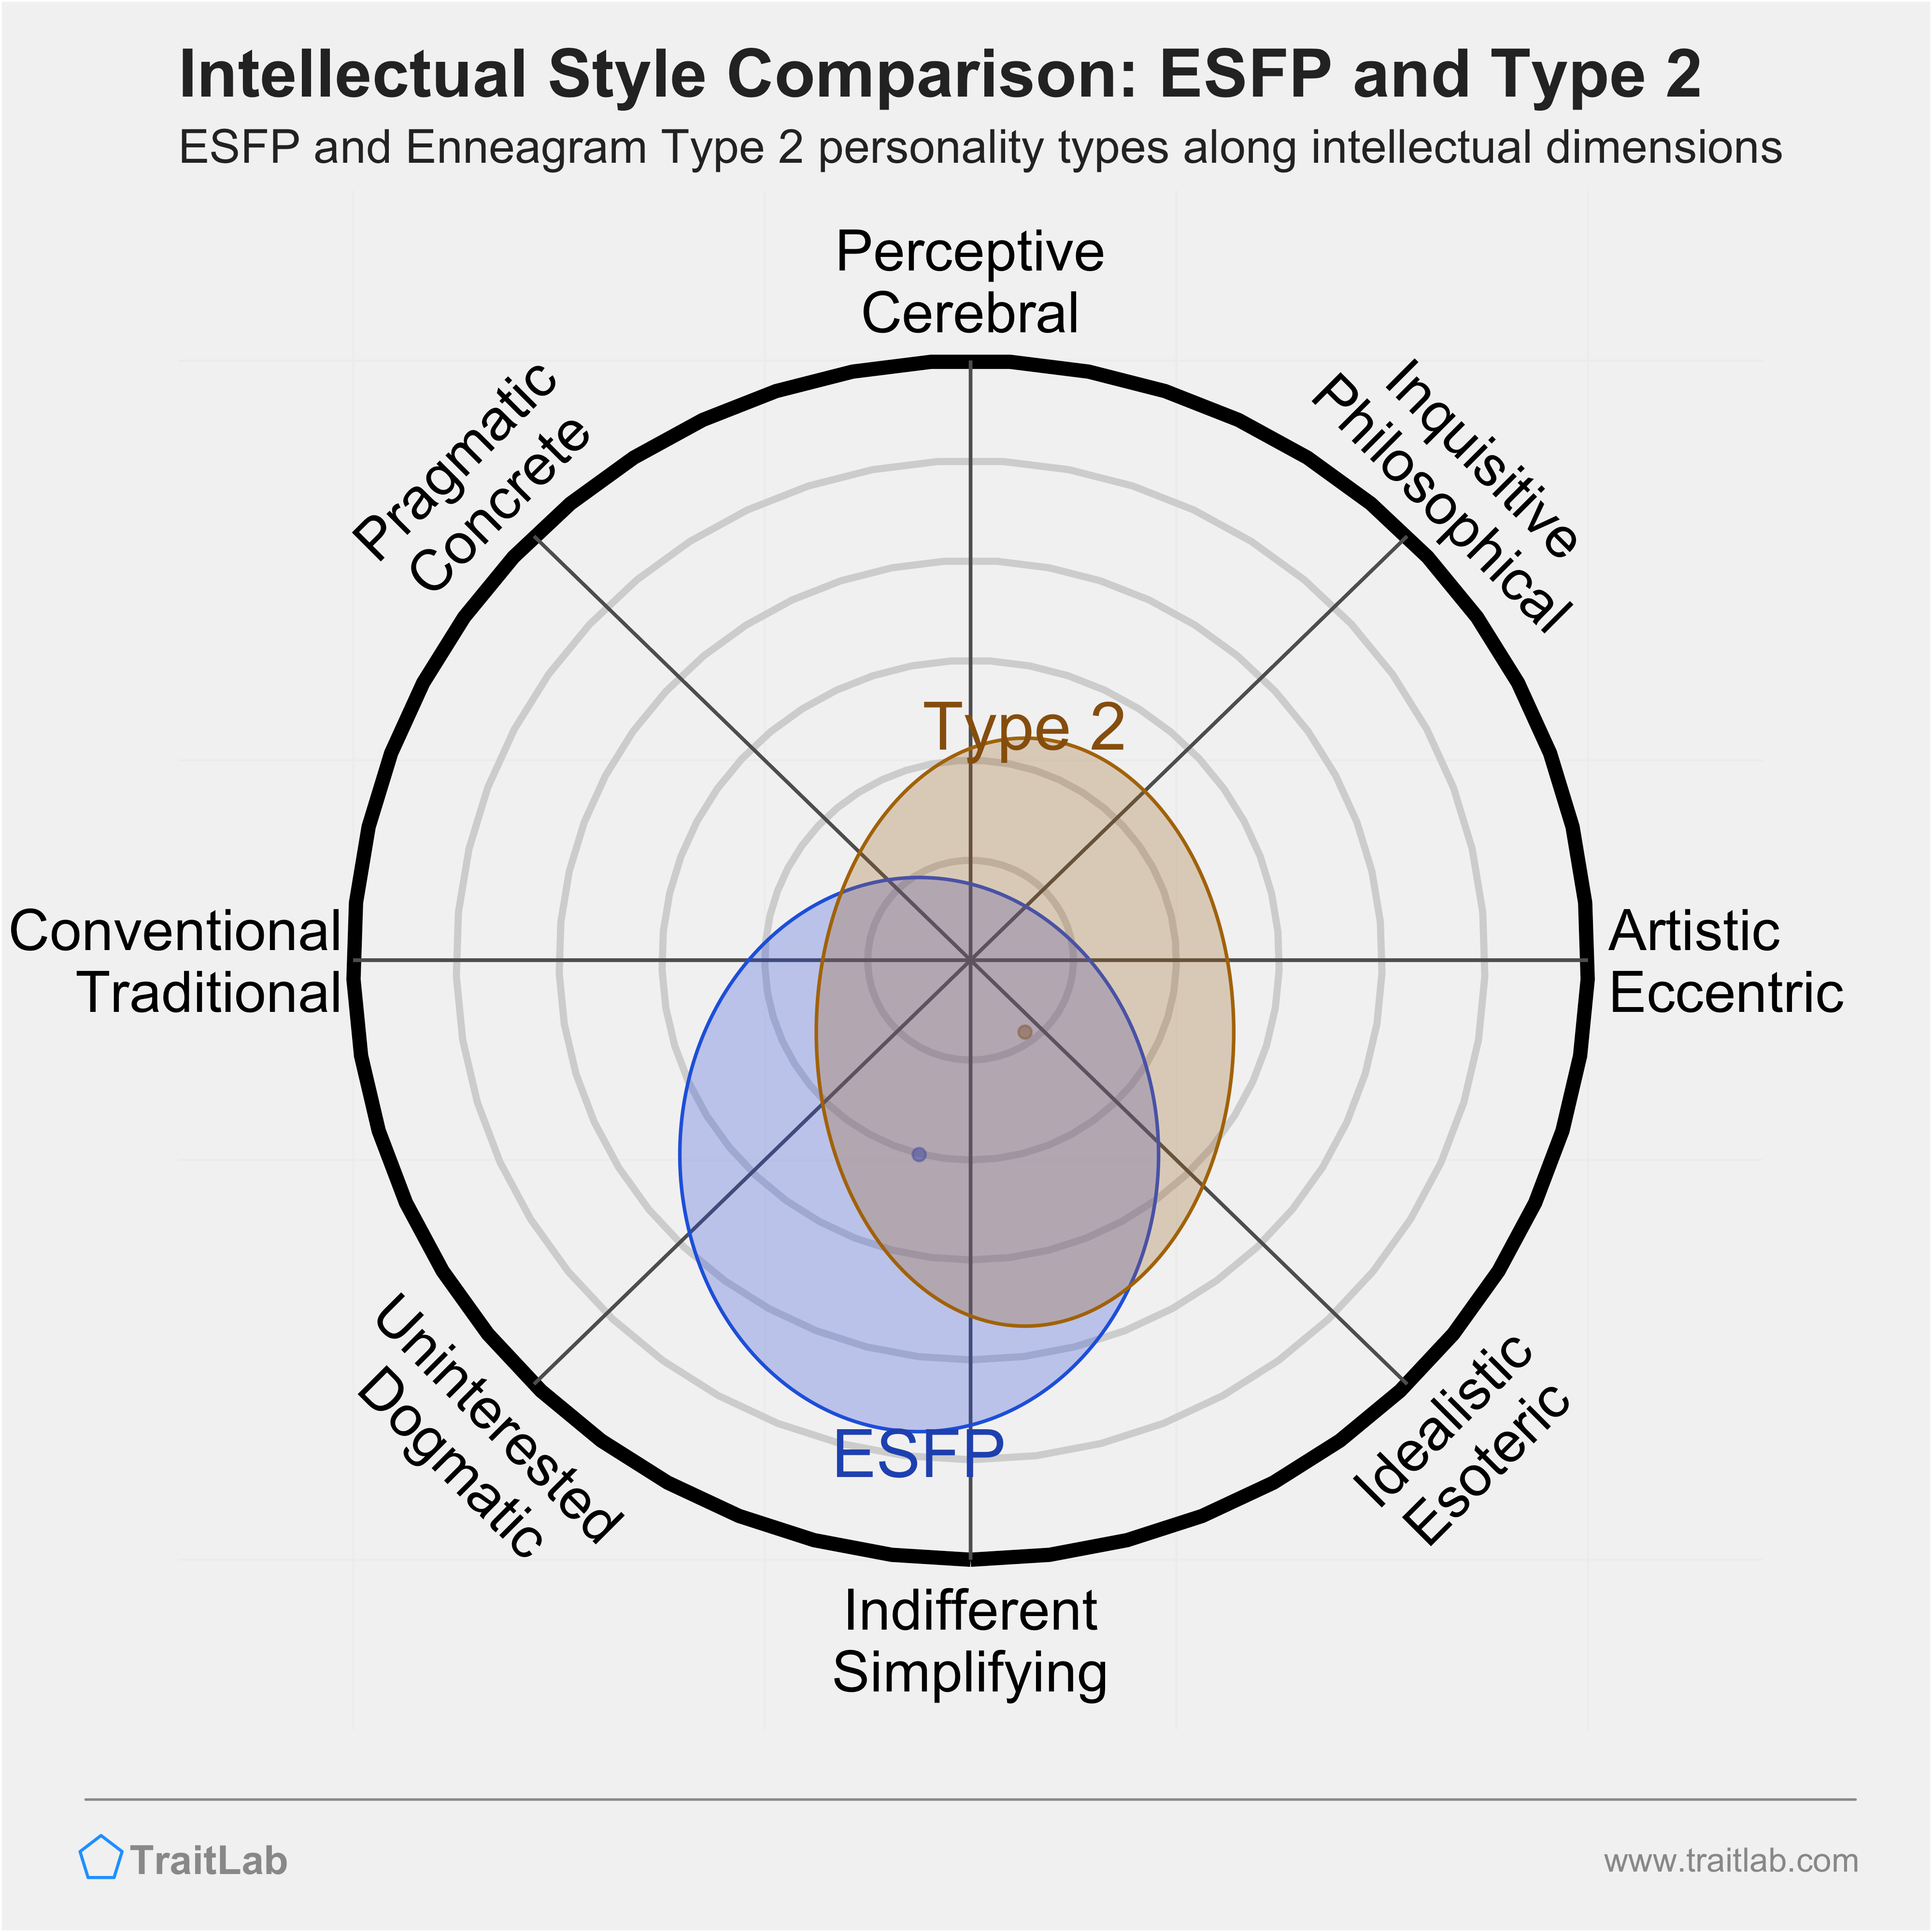 ESFP and Type 2 comparison across intellectual dimensions